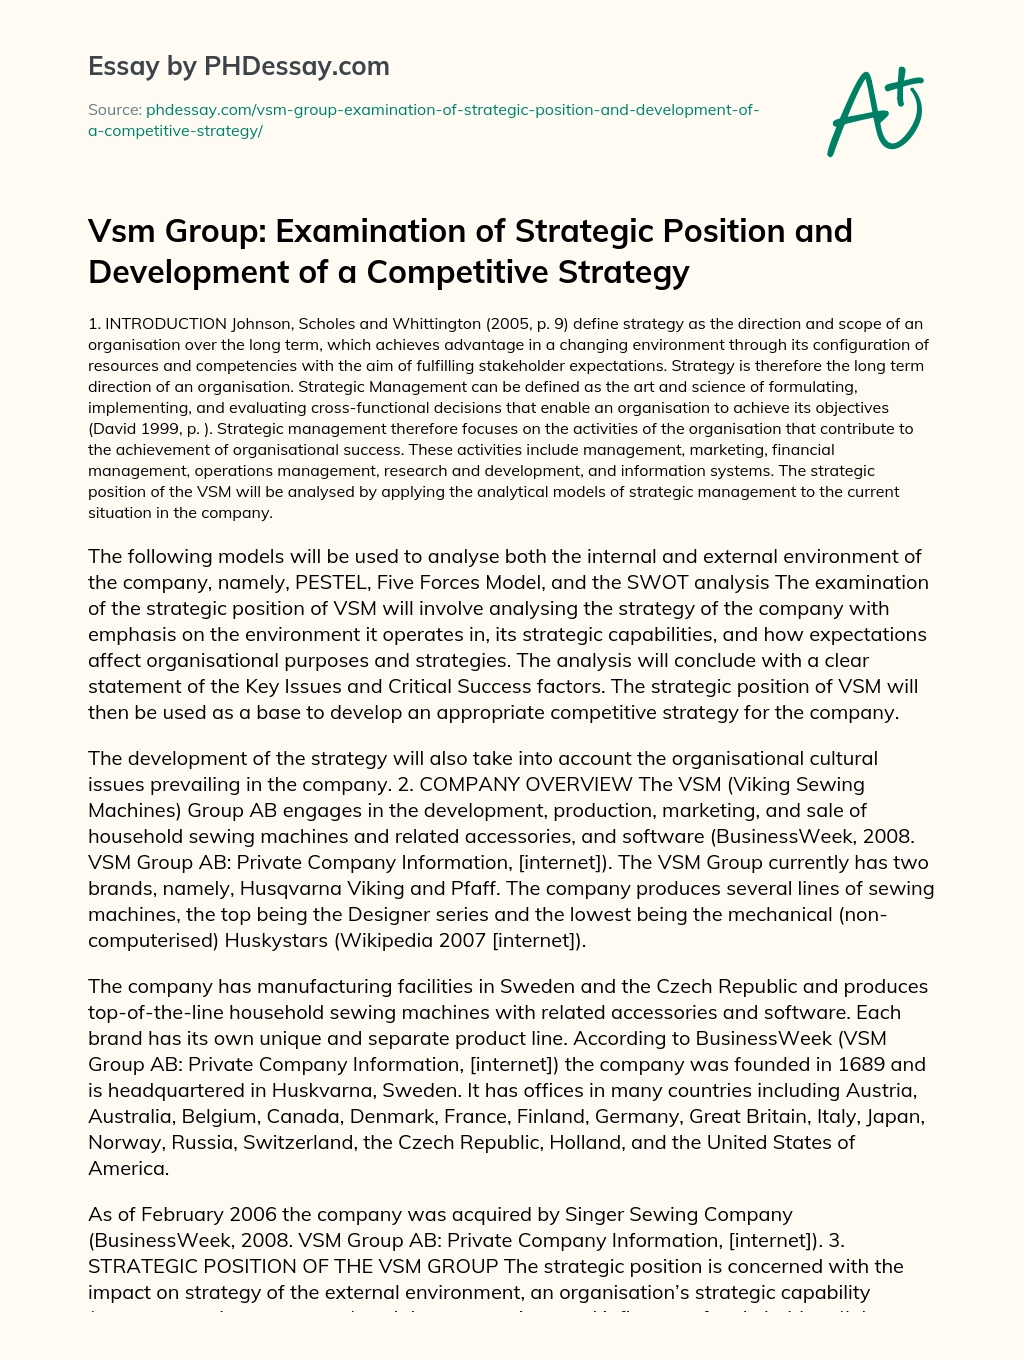 Vsm Group: Examination of Strategic Position and Development of a Competitive Strategy essay